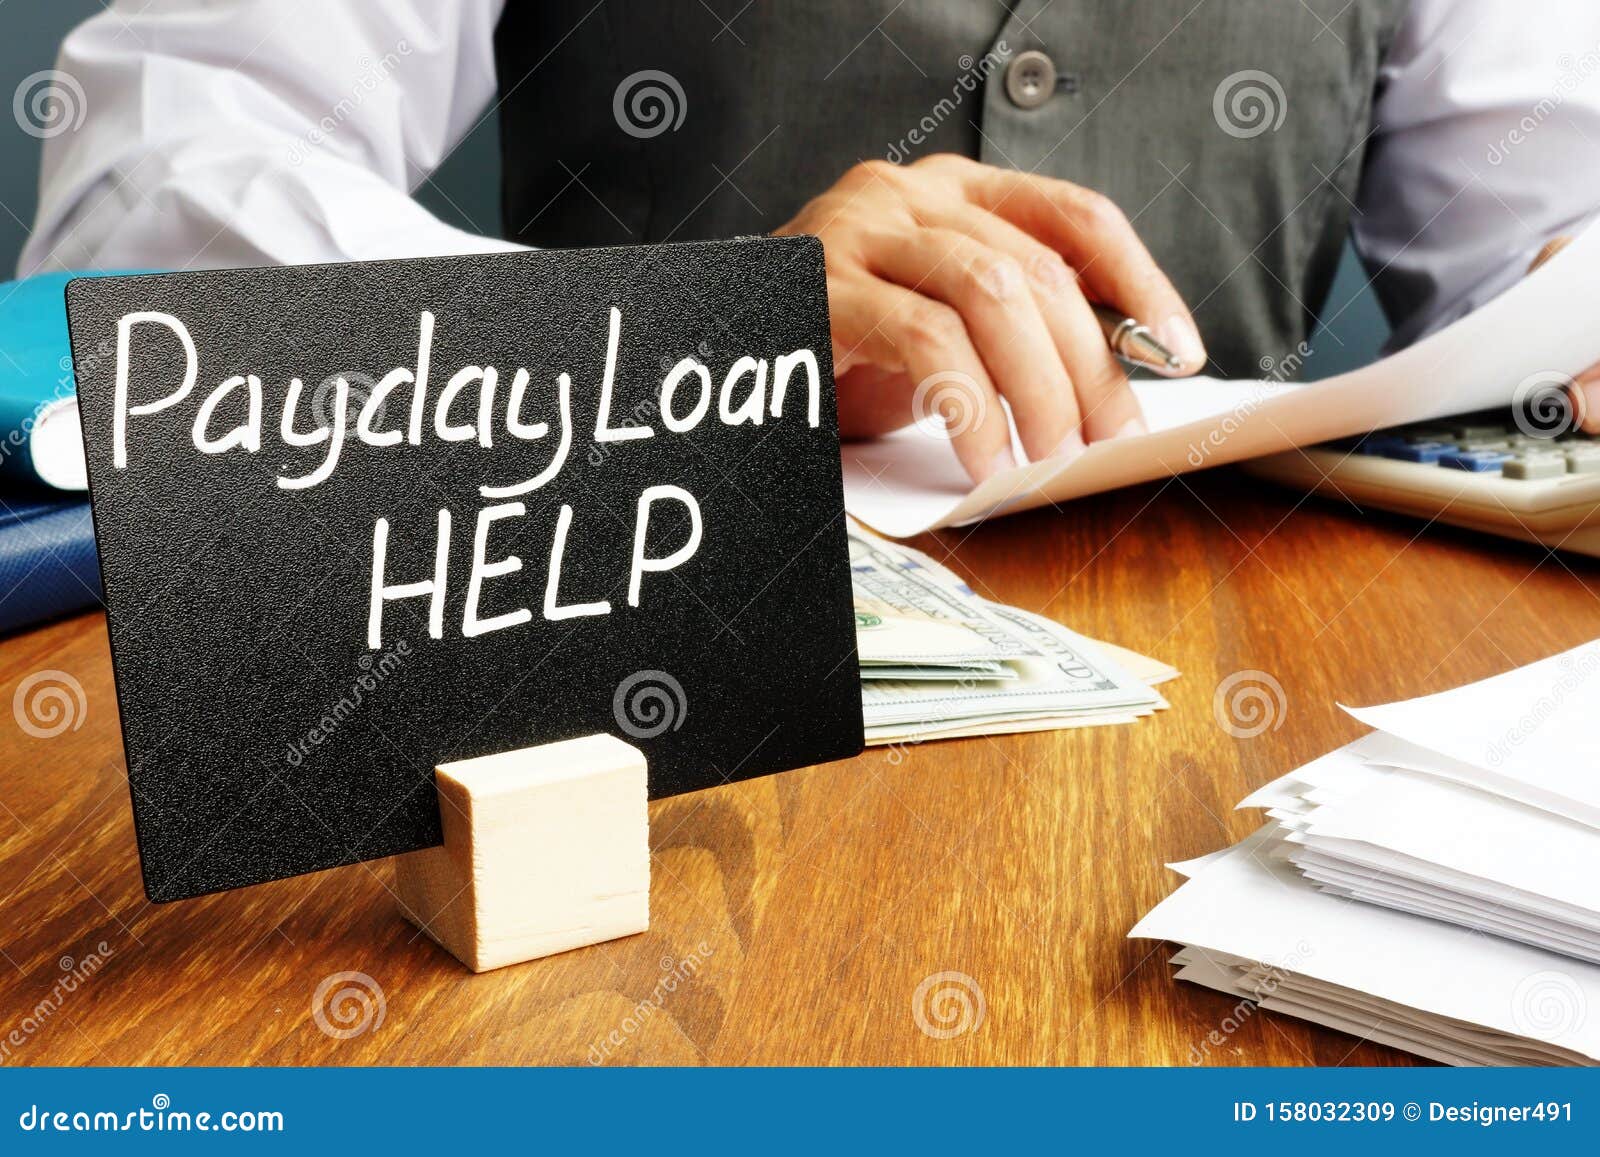 plate with sign payday loan help.